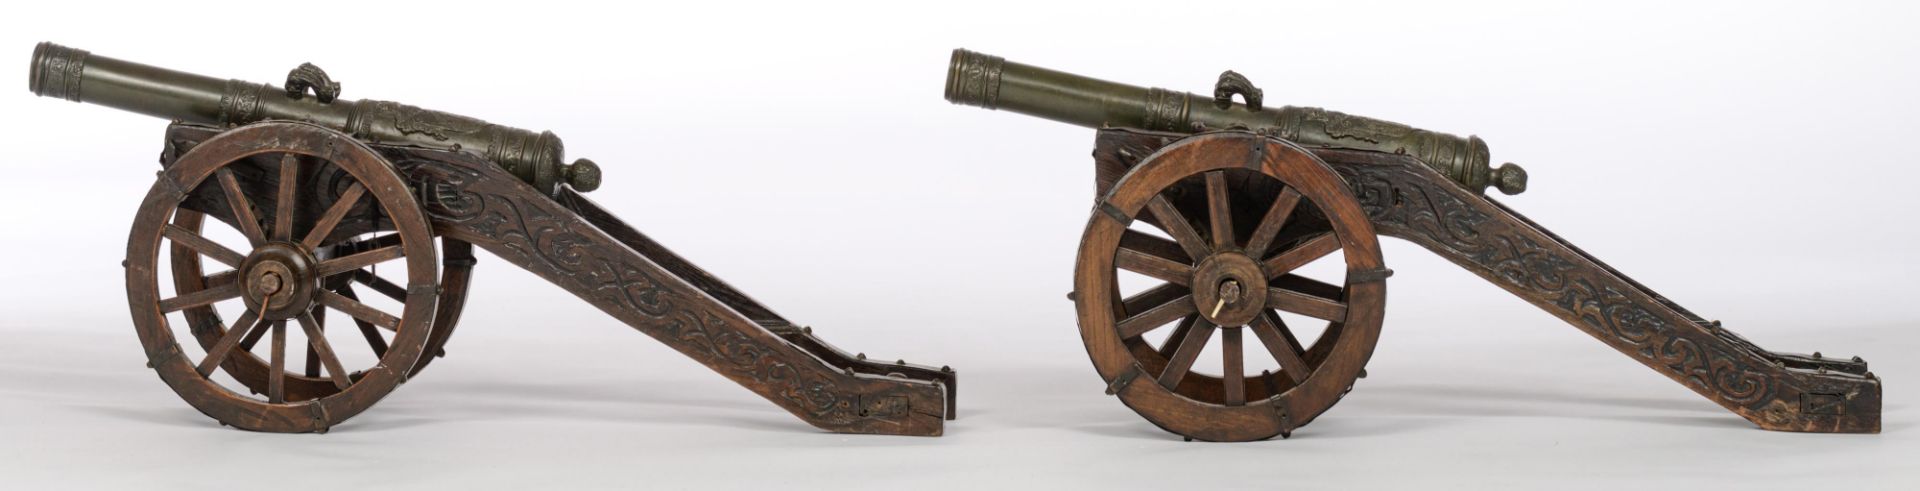 A pair of miniature bronze cannons, with the coat of arms of Dinant and inscription 'Nollet-Macret D - Bild 4 aus 7